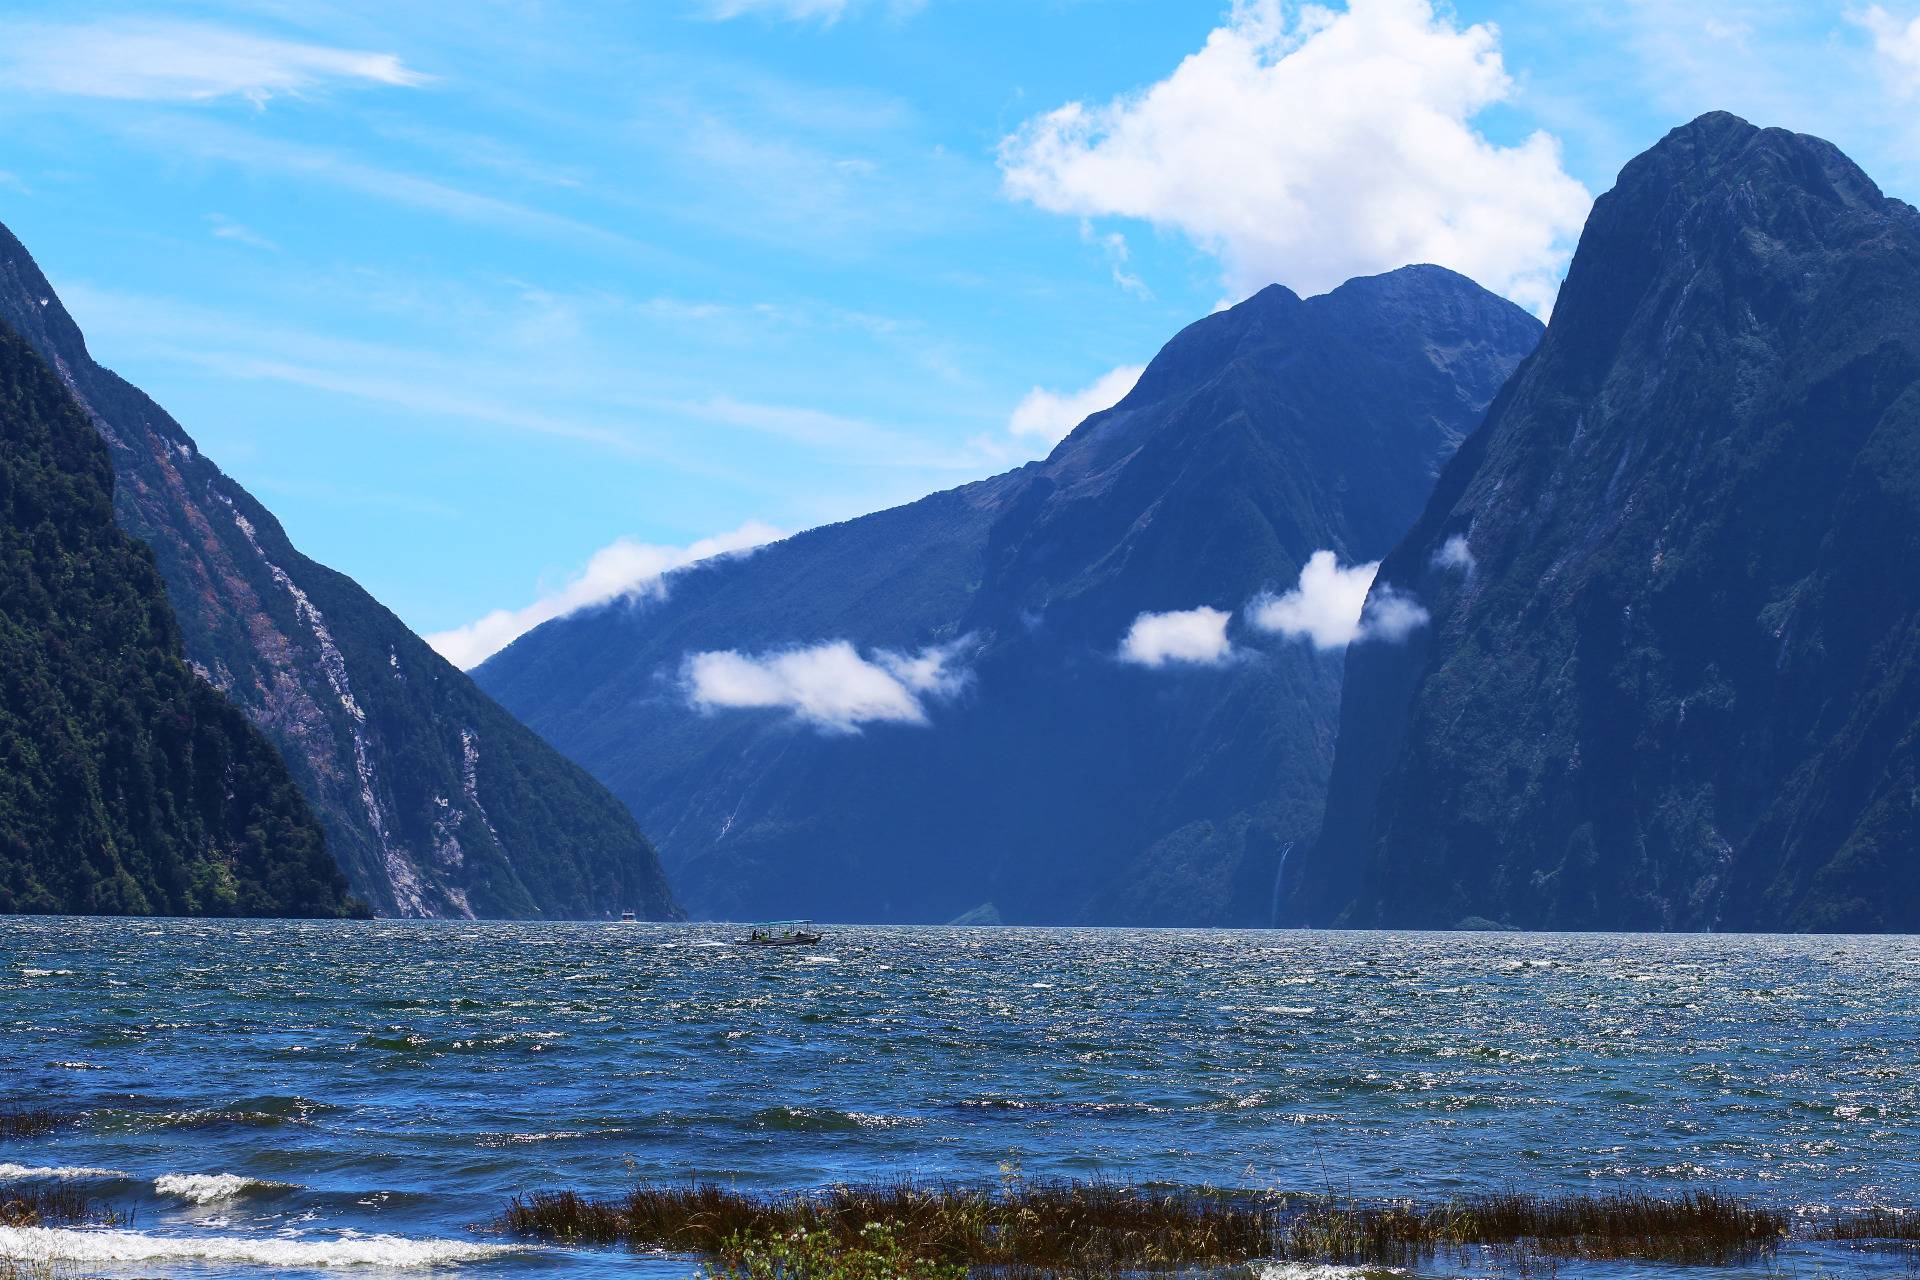 The incredible landscape of the Milford Sound